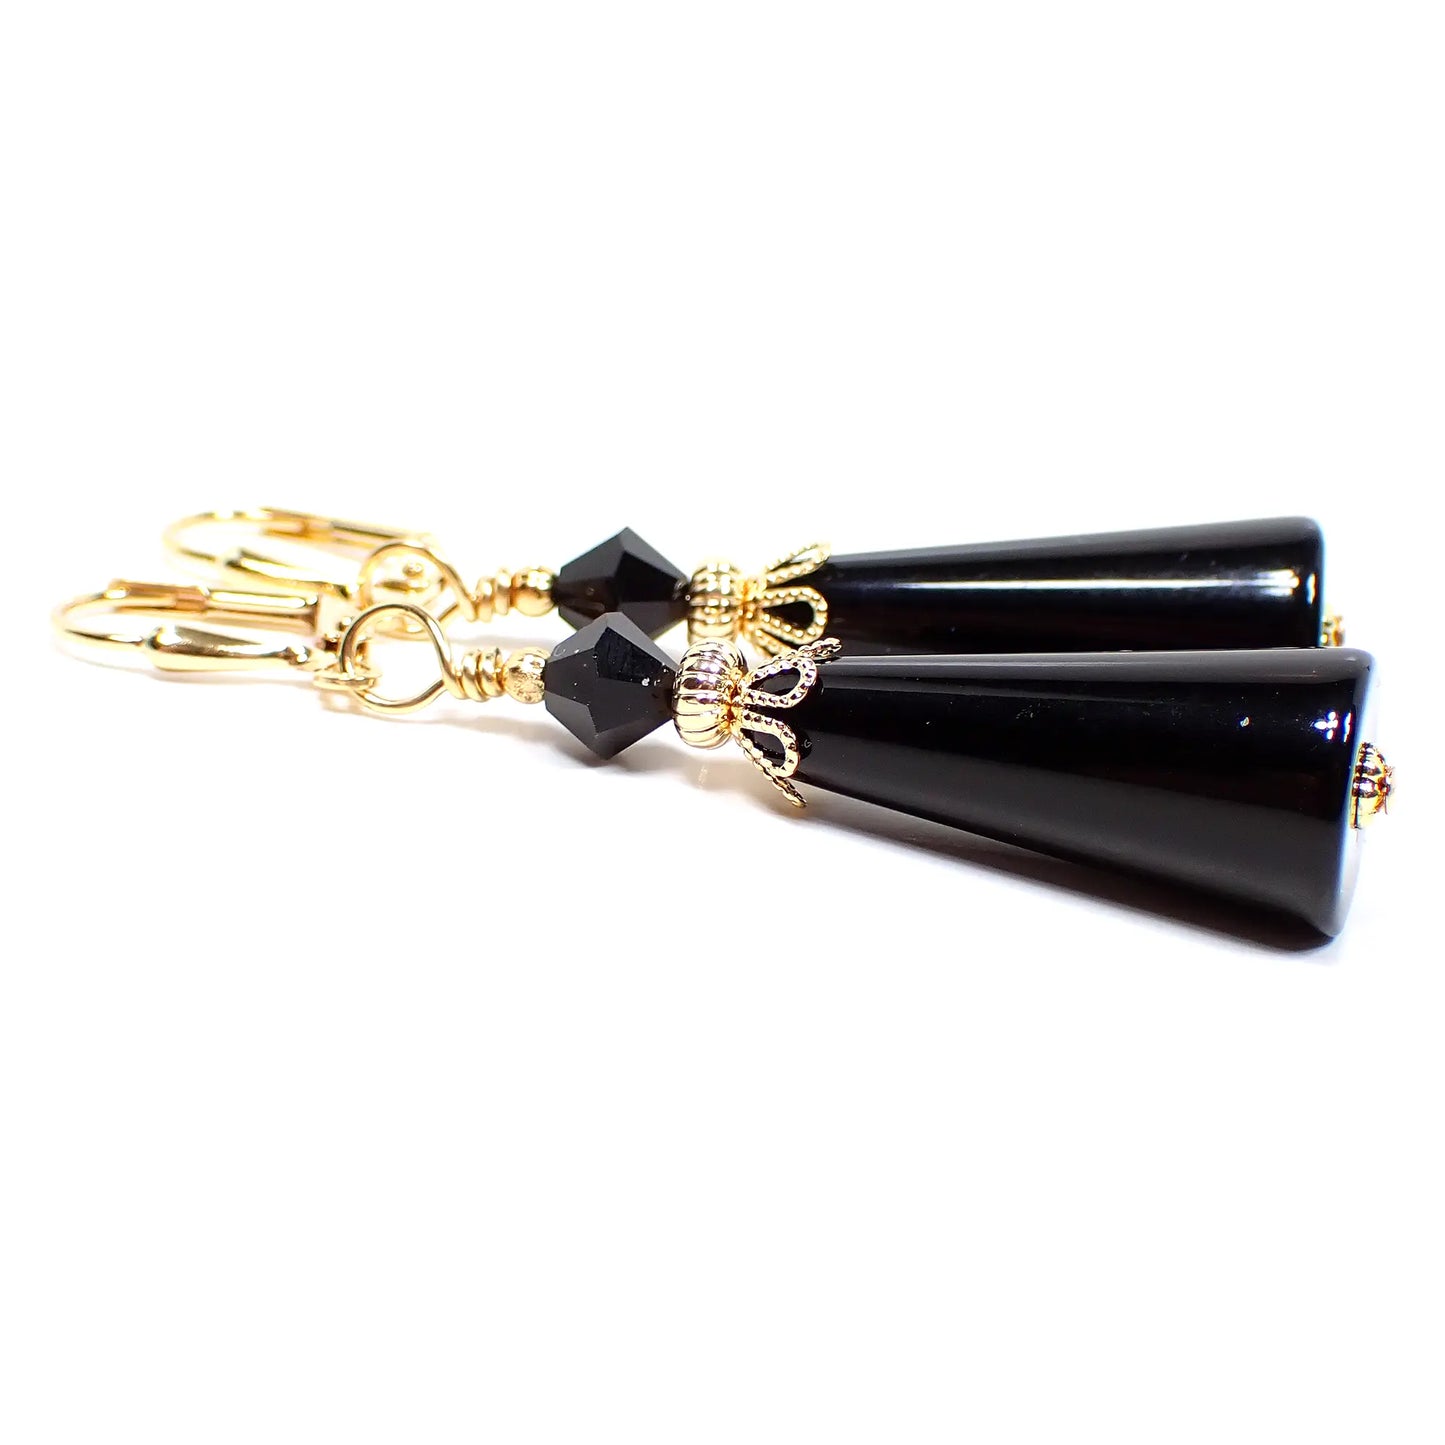 Side view of the handmade cone earrings with vintage lucite beads. The metal is gold plated in color. There is a faceted bicone glass crystal bead at the top in black. The bottom lucite bead is cone shaped with the tapered end at the top and it is also black in color.